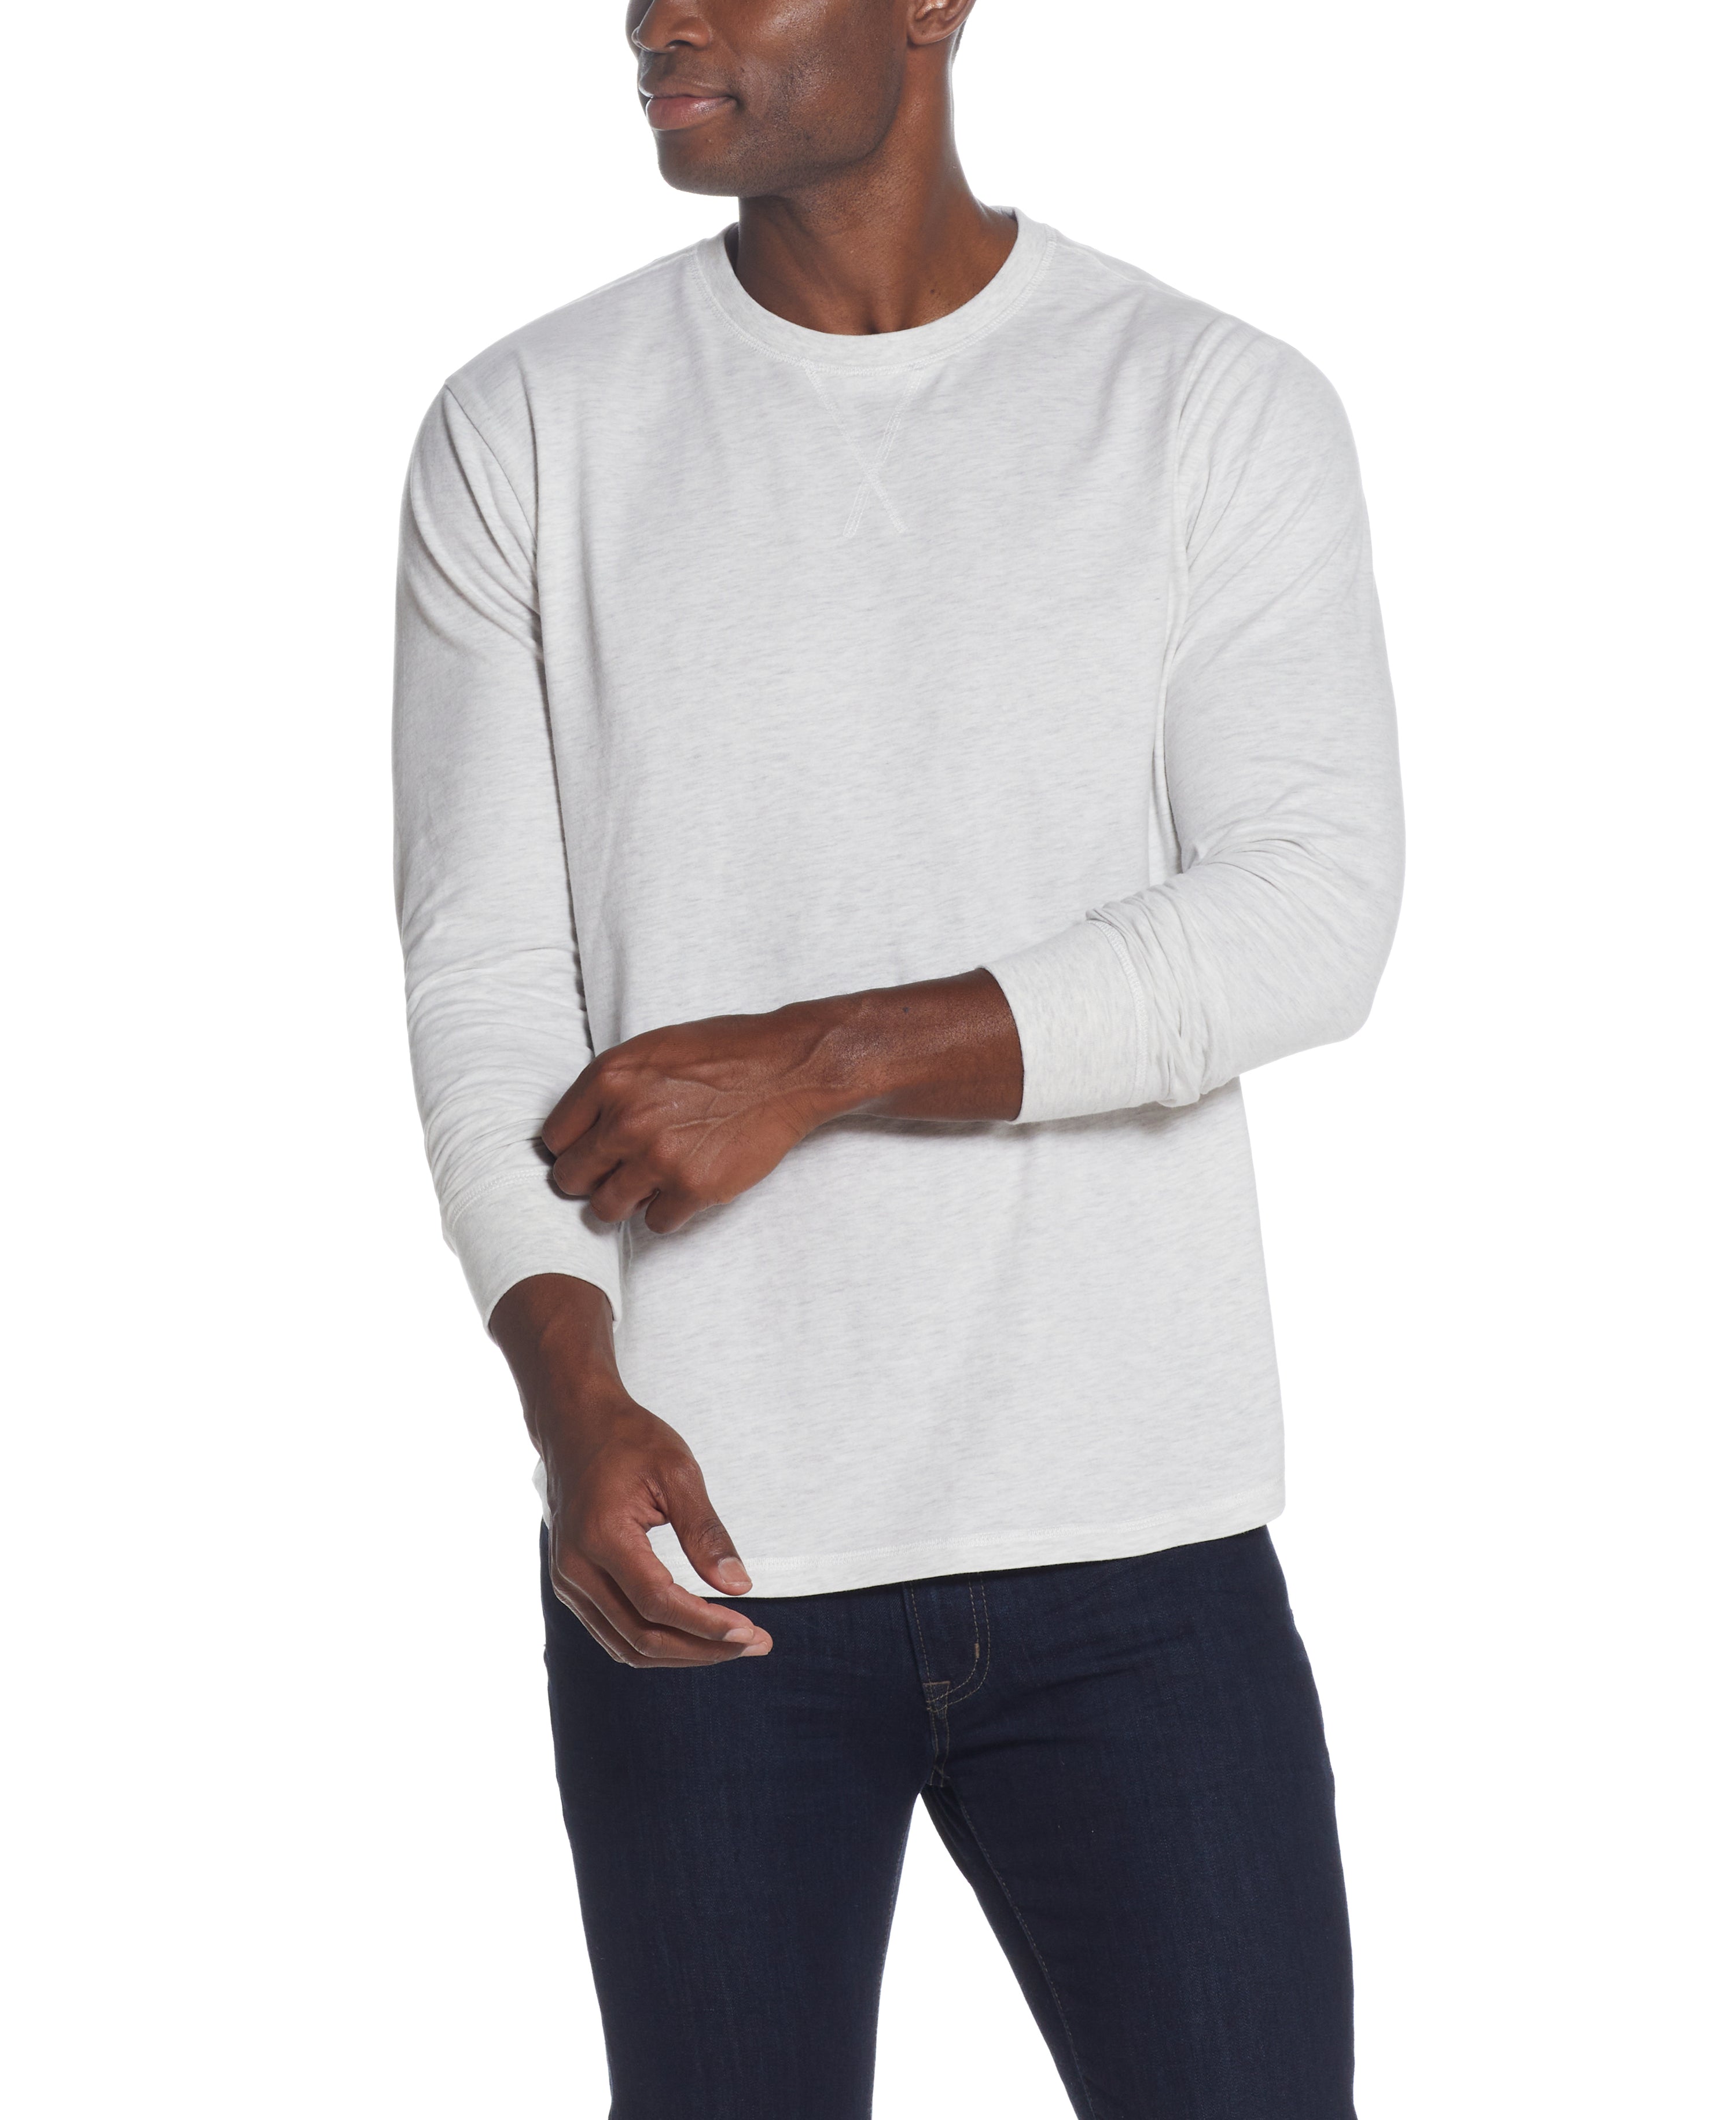 LONG SLEEVE BRUSHED JERSEY CREW in OATMEAL